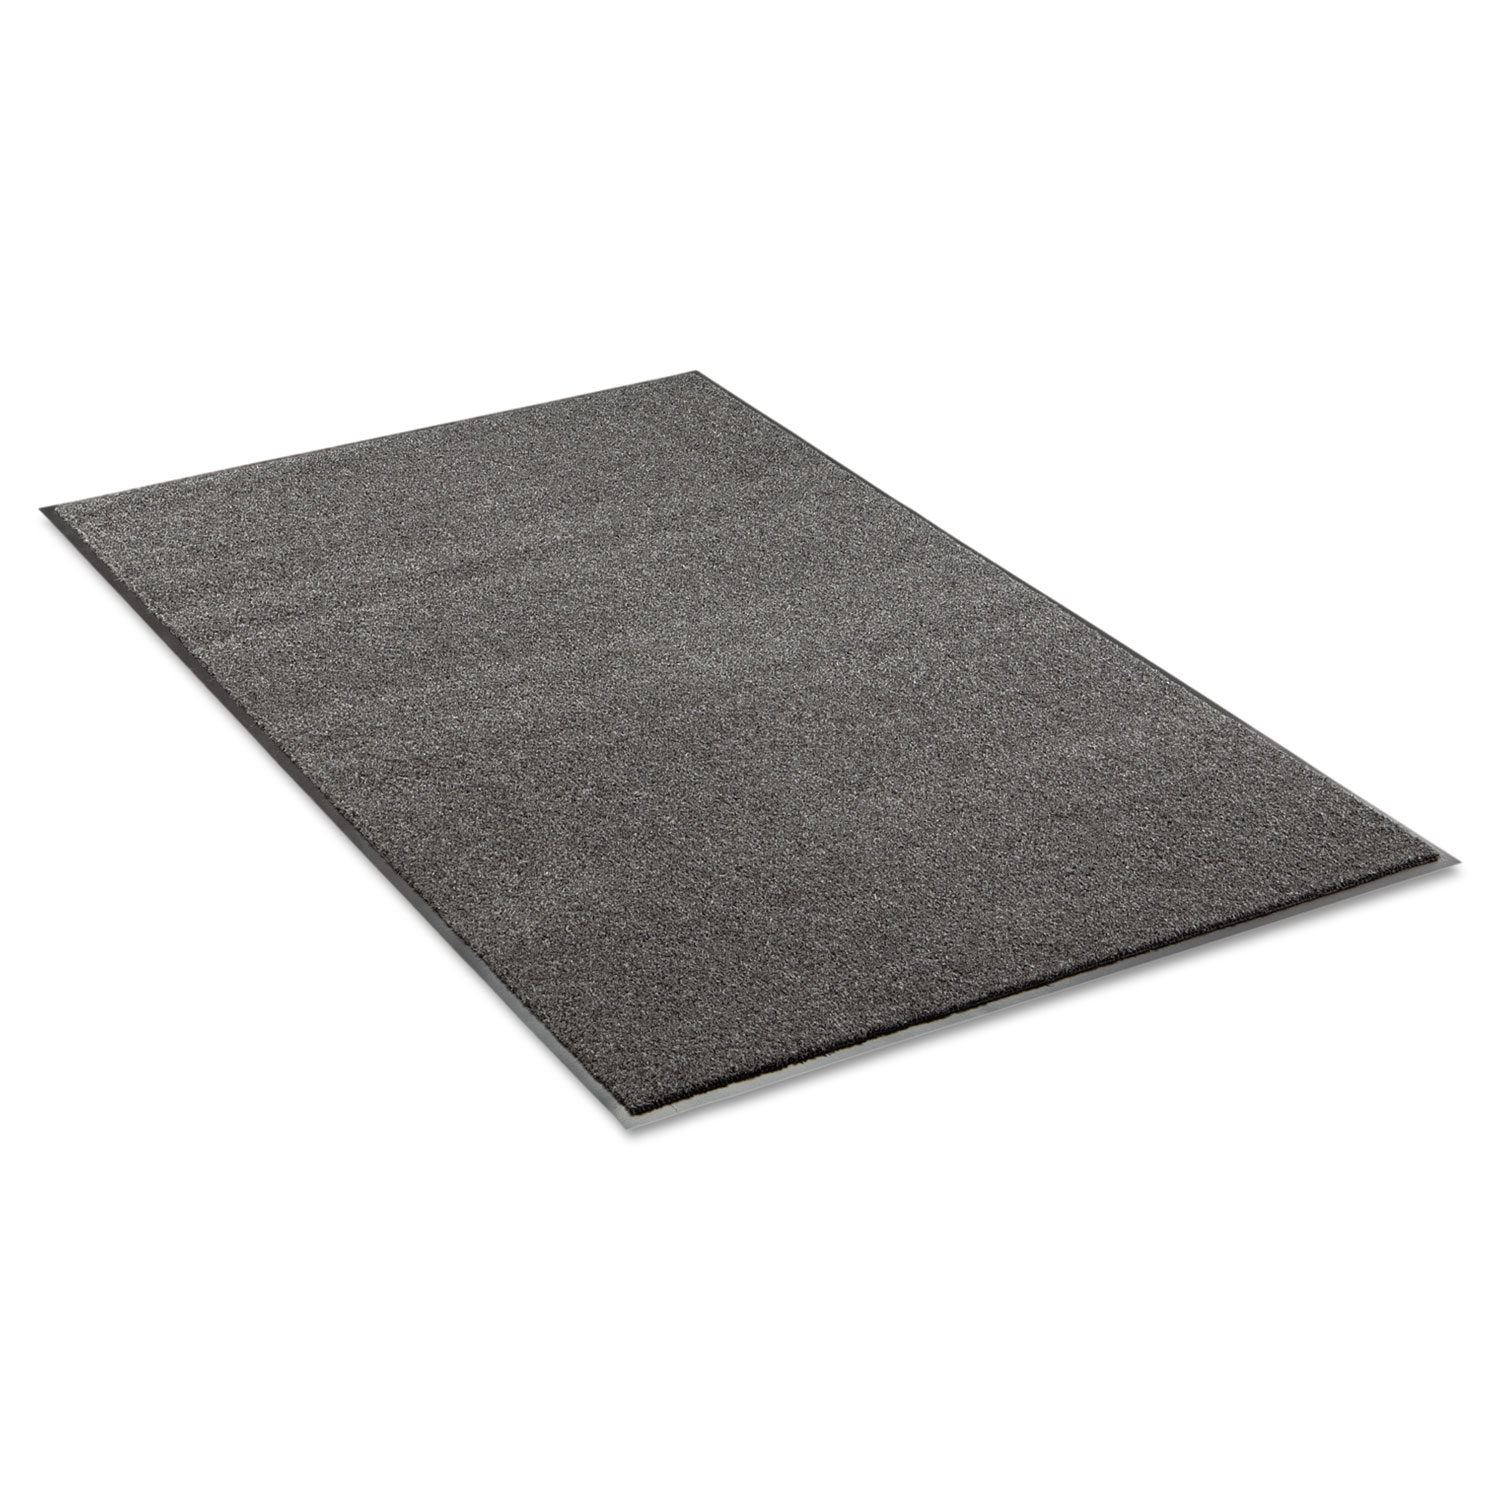  Crown GS 0035CH Rely-On Olefin Indoor Wiper Mat, 36 x 60, Charcoal (CWNGS0035CH) 